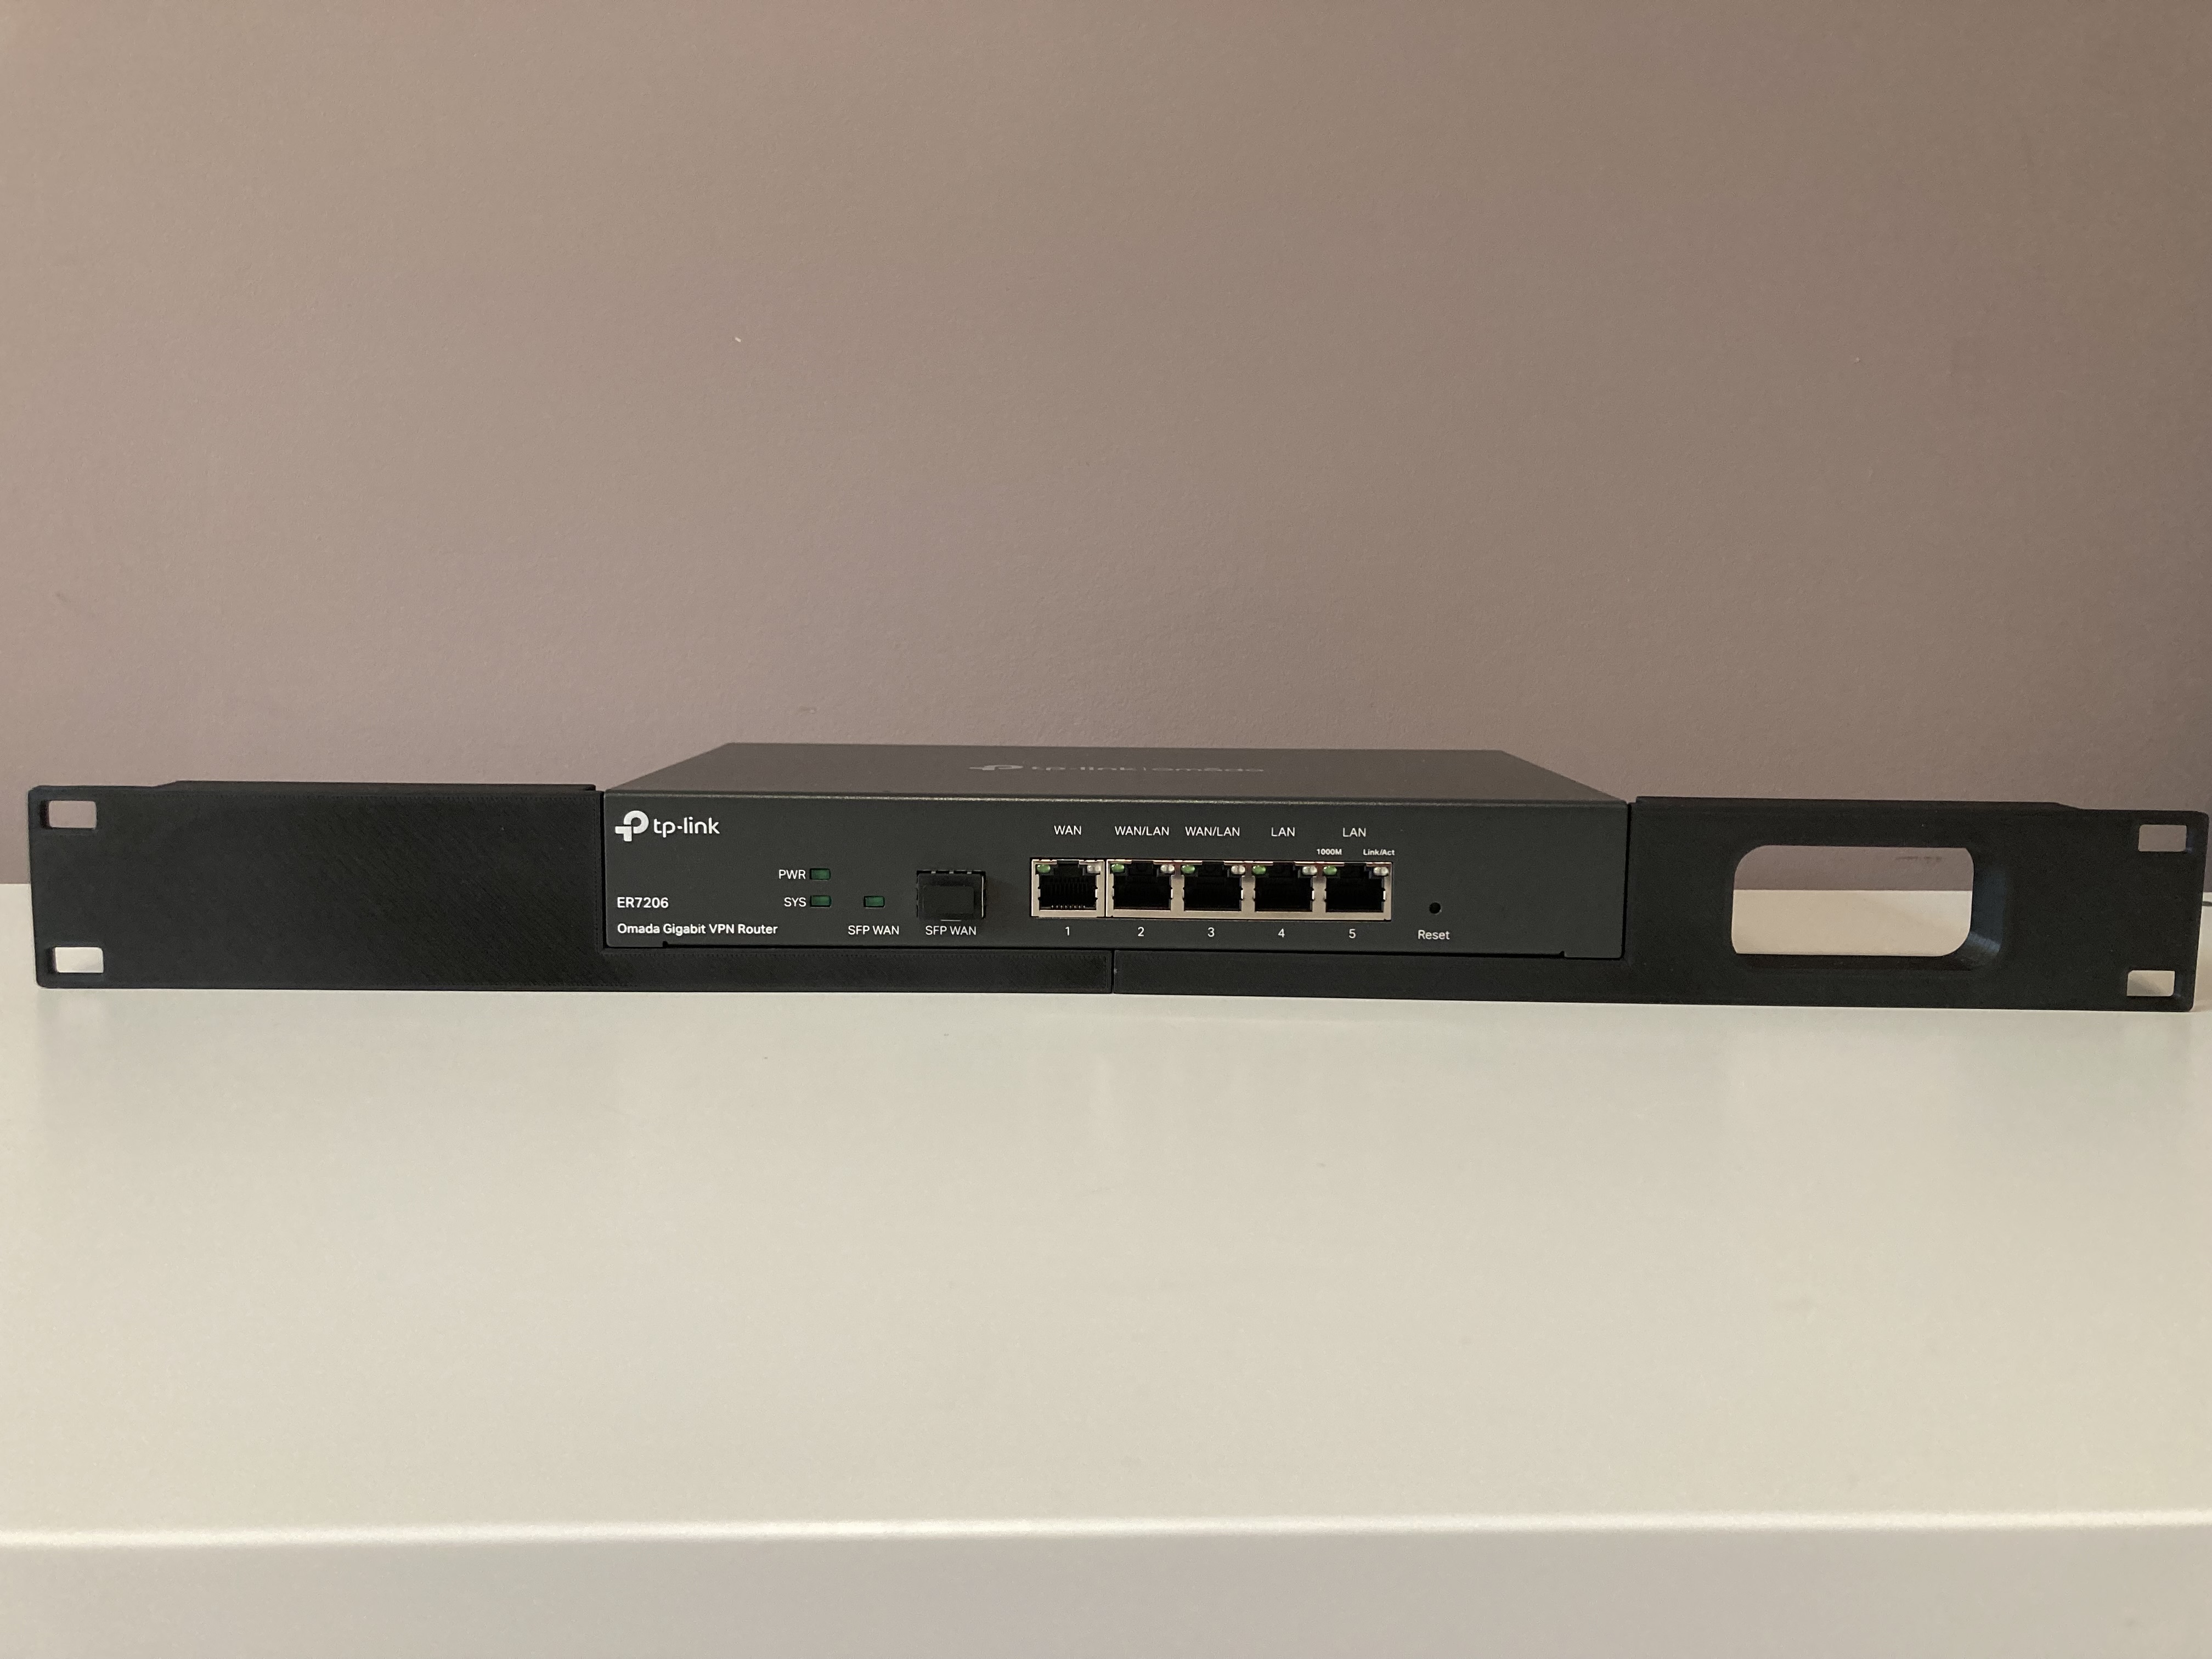 TP-Link 1U rackmount housing for ER7206 router by calipsoii | Download ...